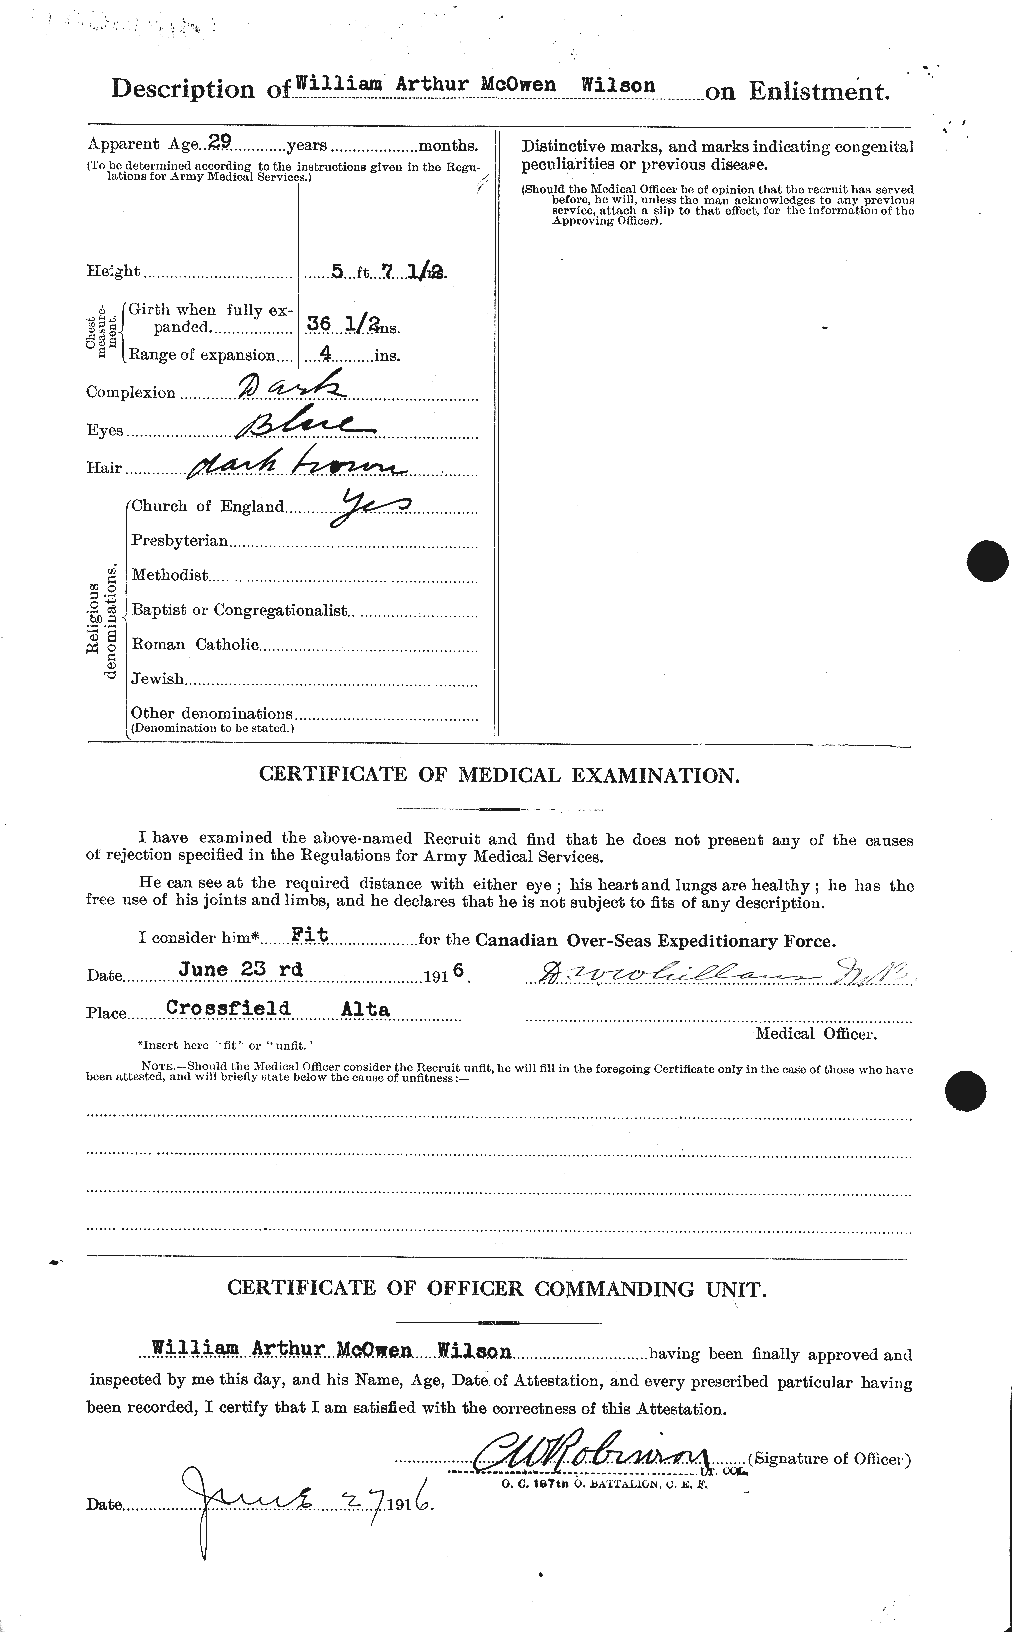 Personnel Records of the First World War - CEF 681935b